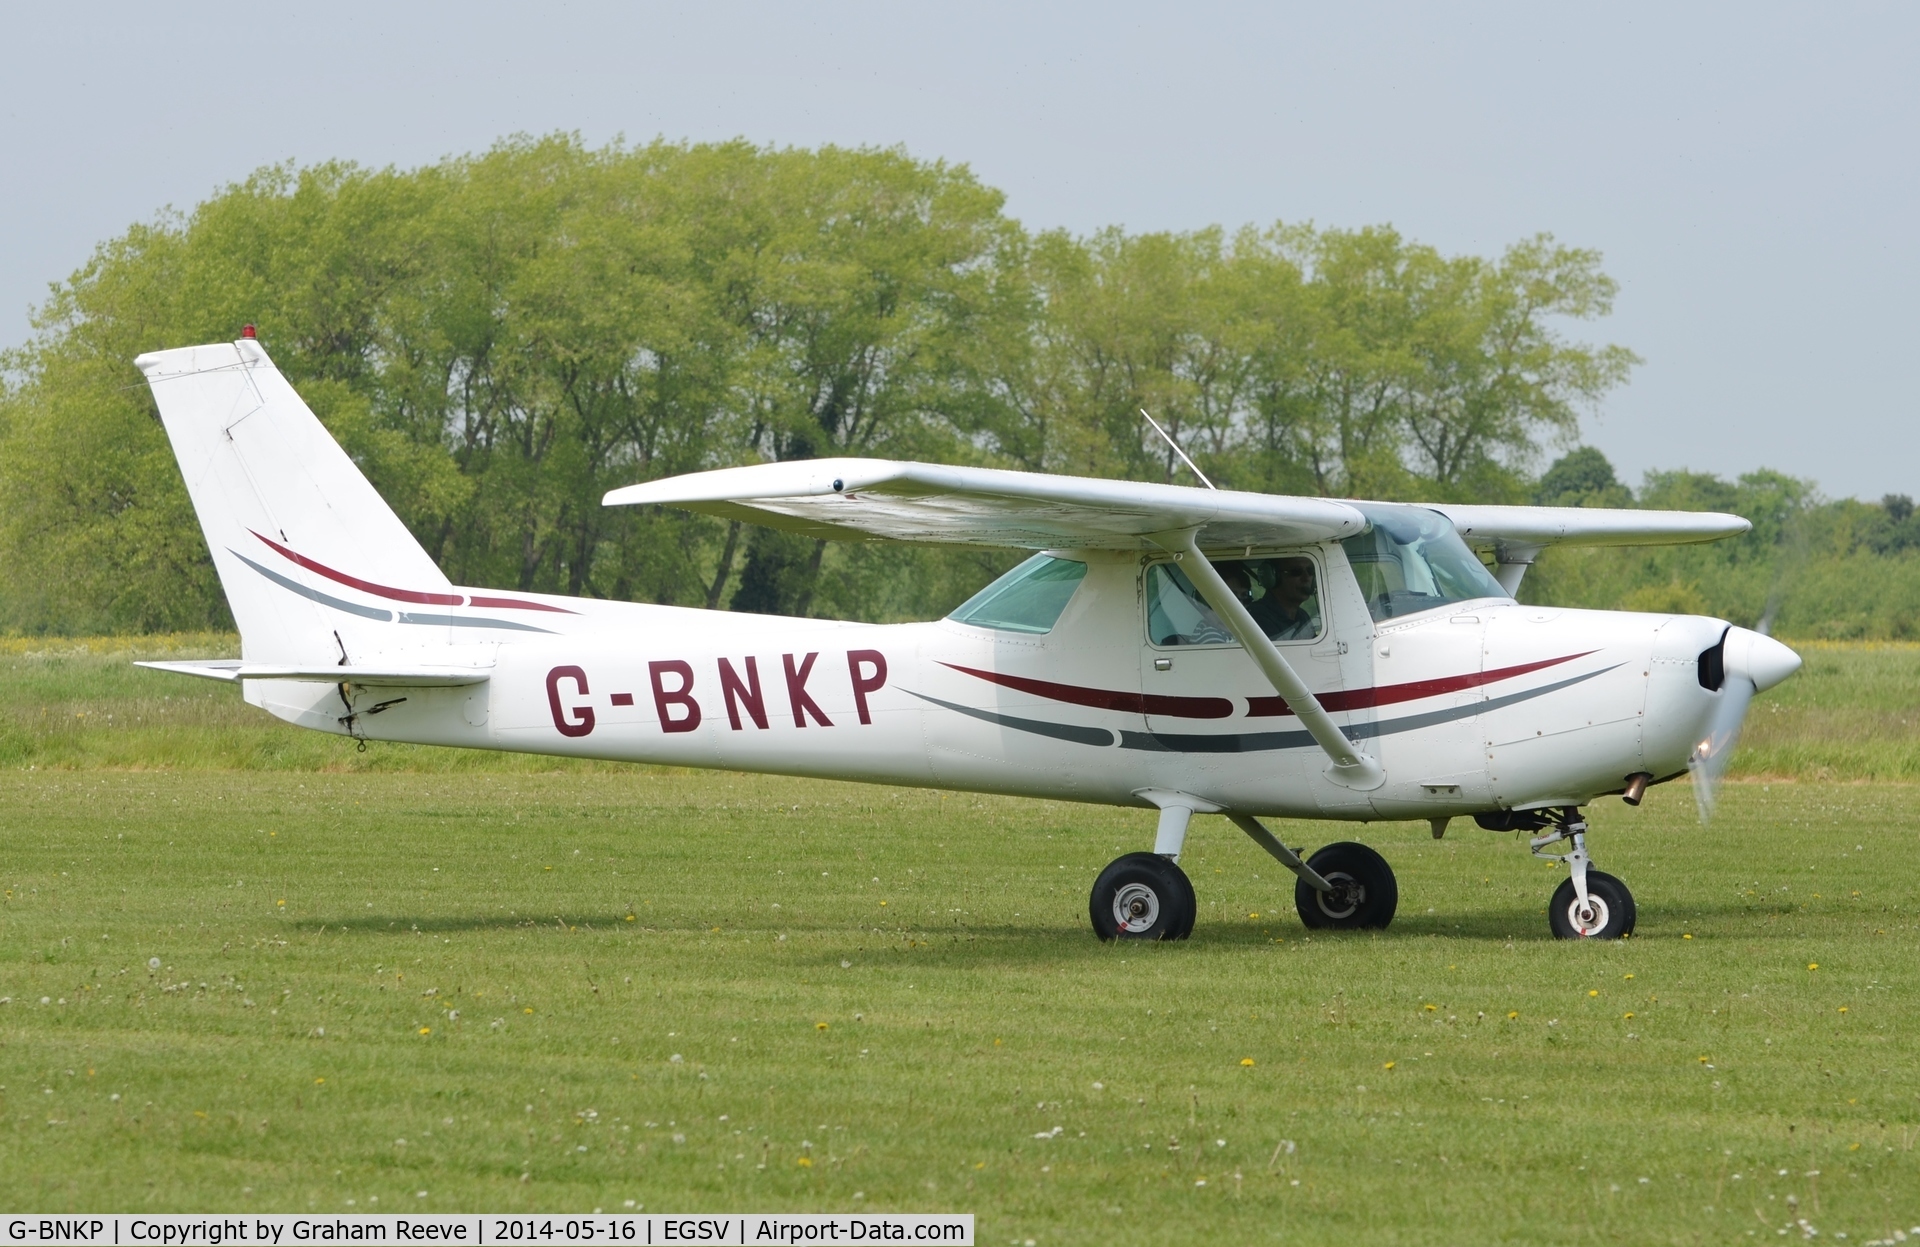 G-BNKP, 1978 Cessna 152 C/N 152-81286, About to depart.